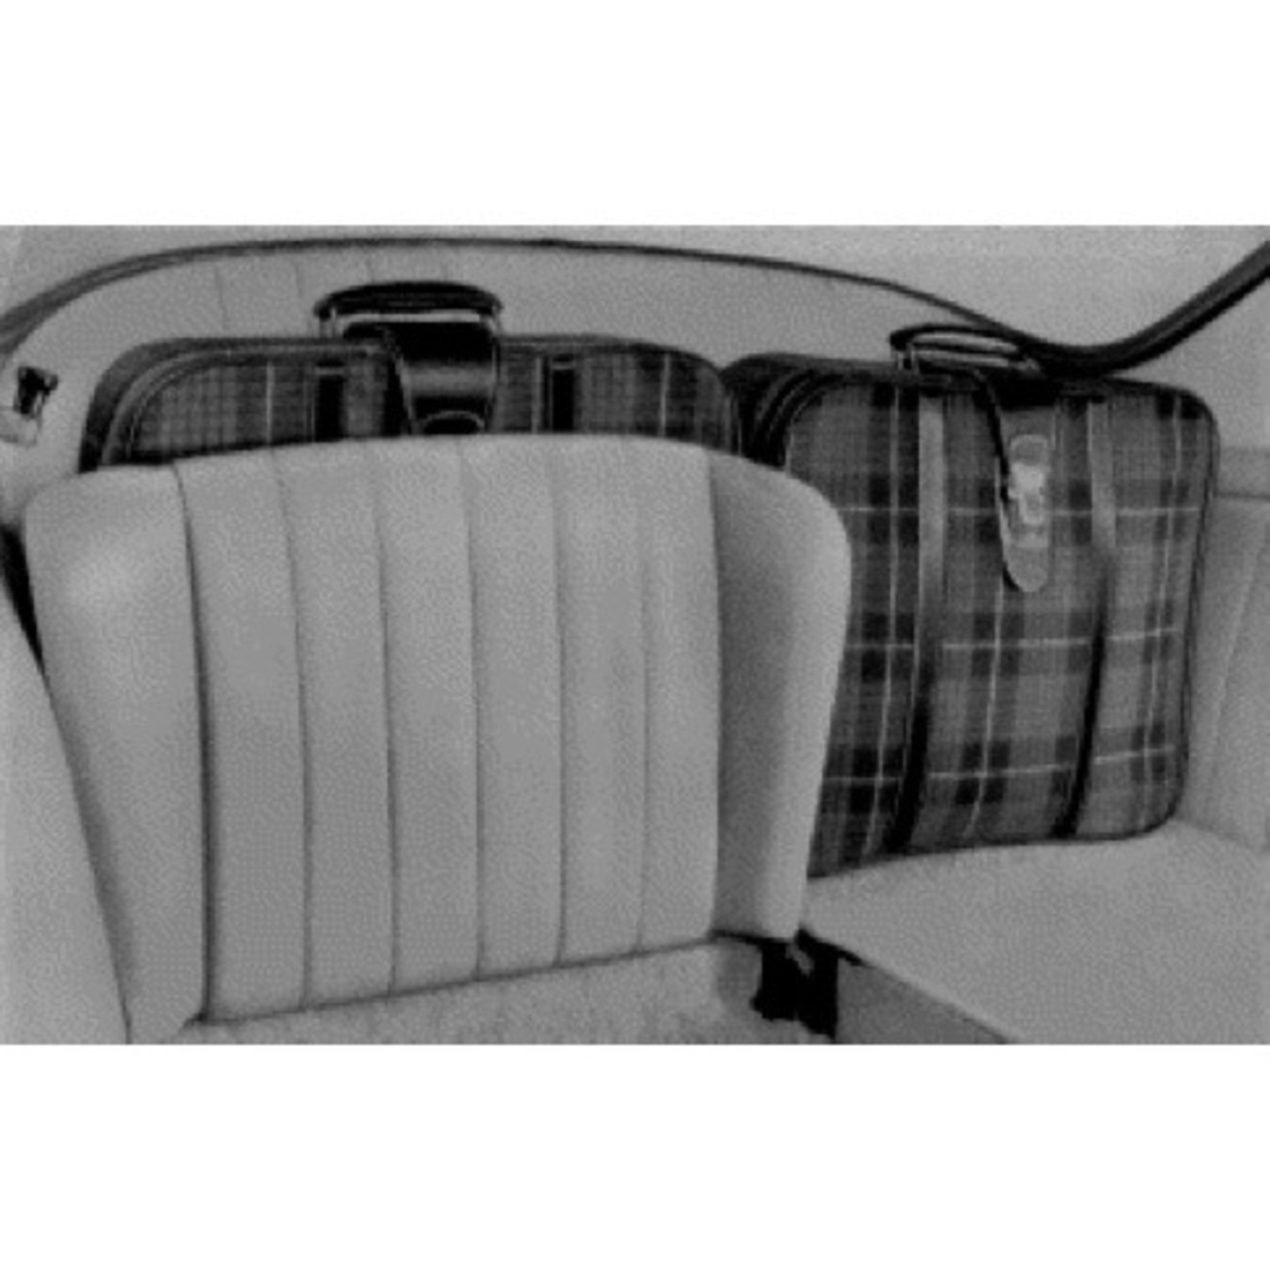 ORIGINAL FACTORY ACCESSORIES Porsche 356 A BT5 plaid tartan canvas suitcase and bag behind auxiliary seats, under front hood Original Laurent Nay Maroquinerie